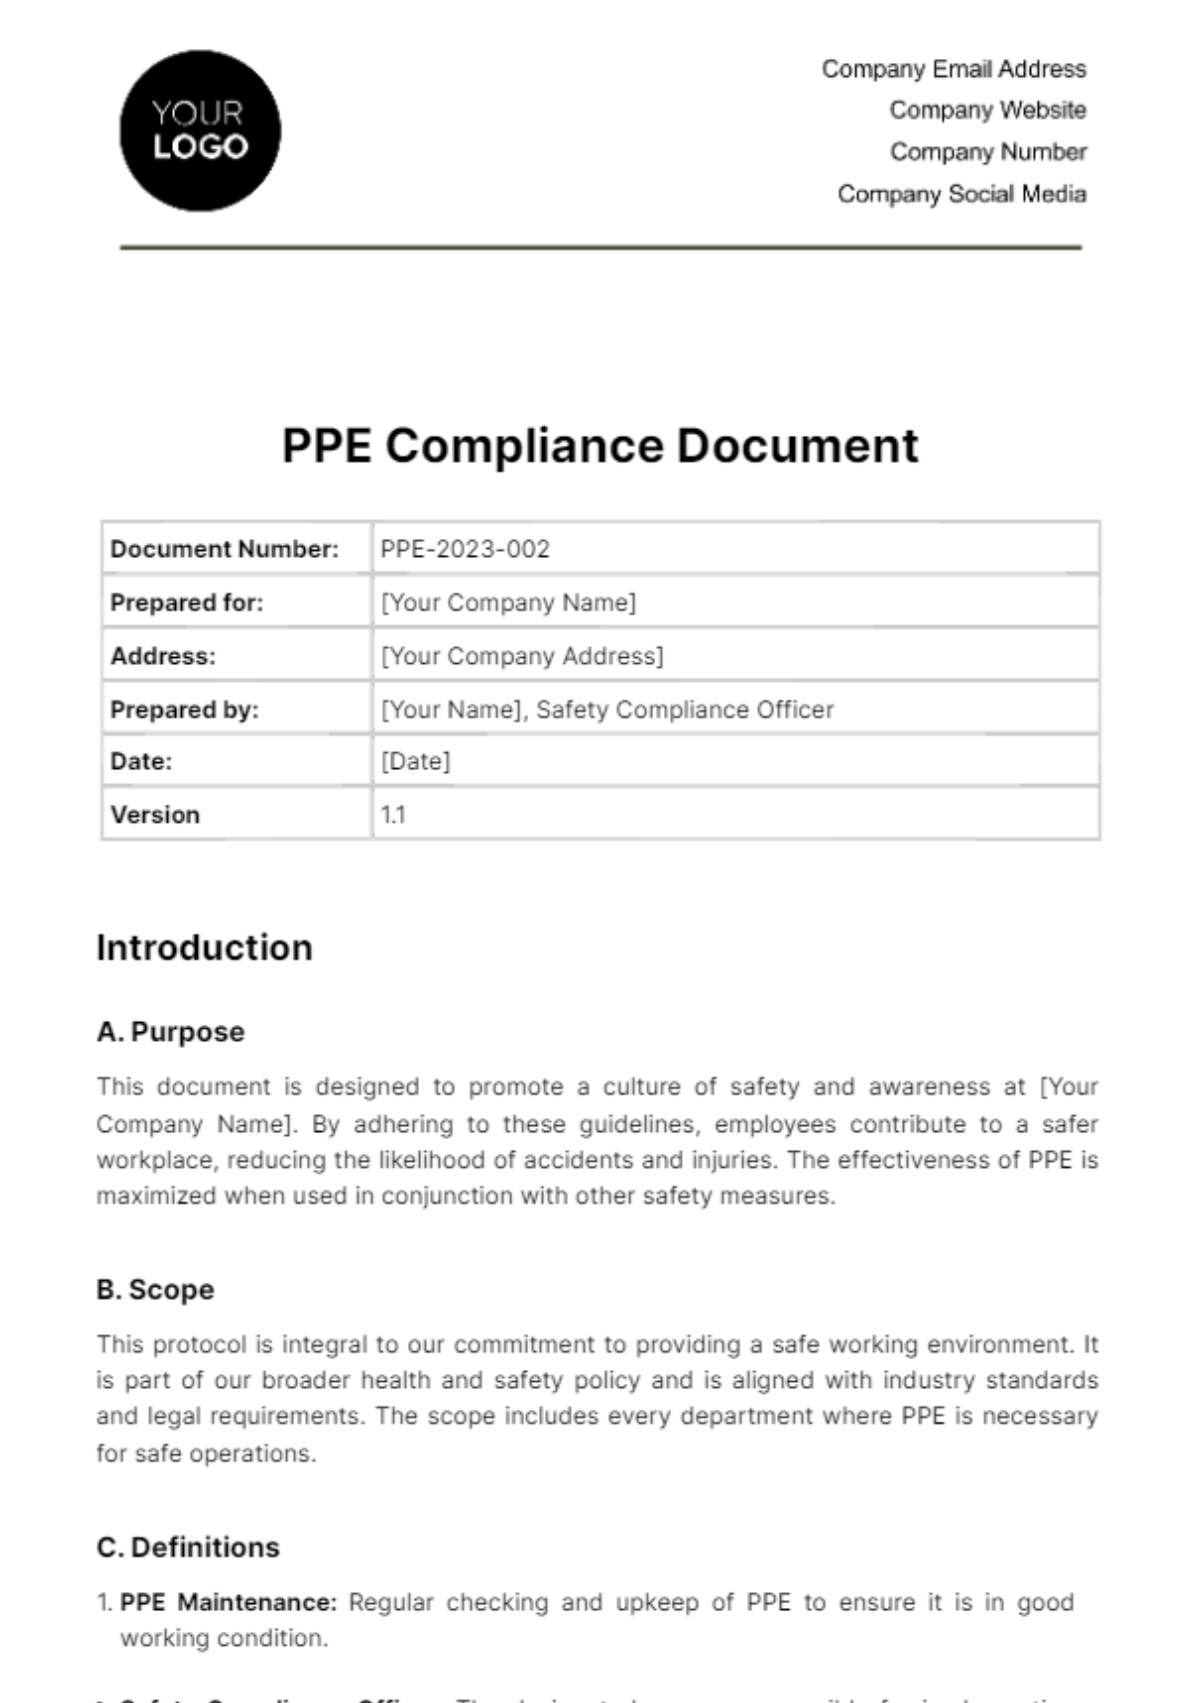 PPE Compliance Document Template